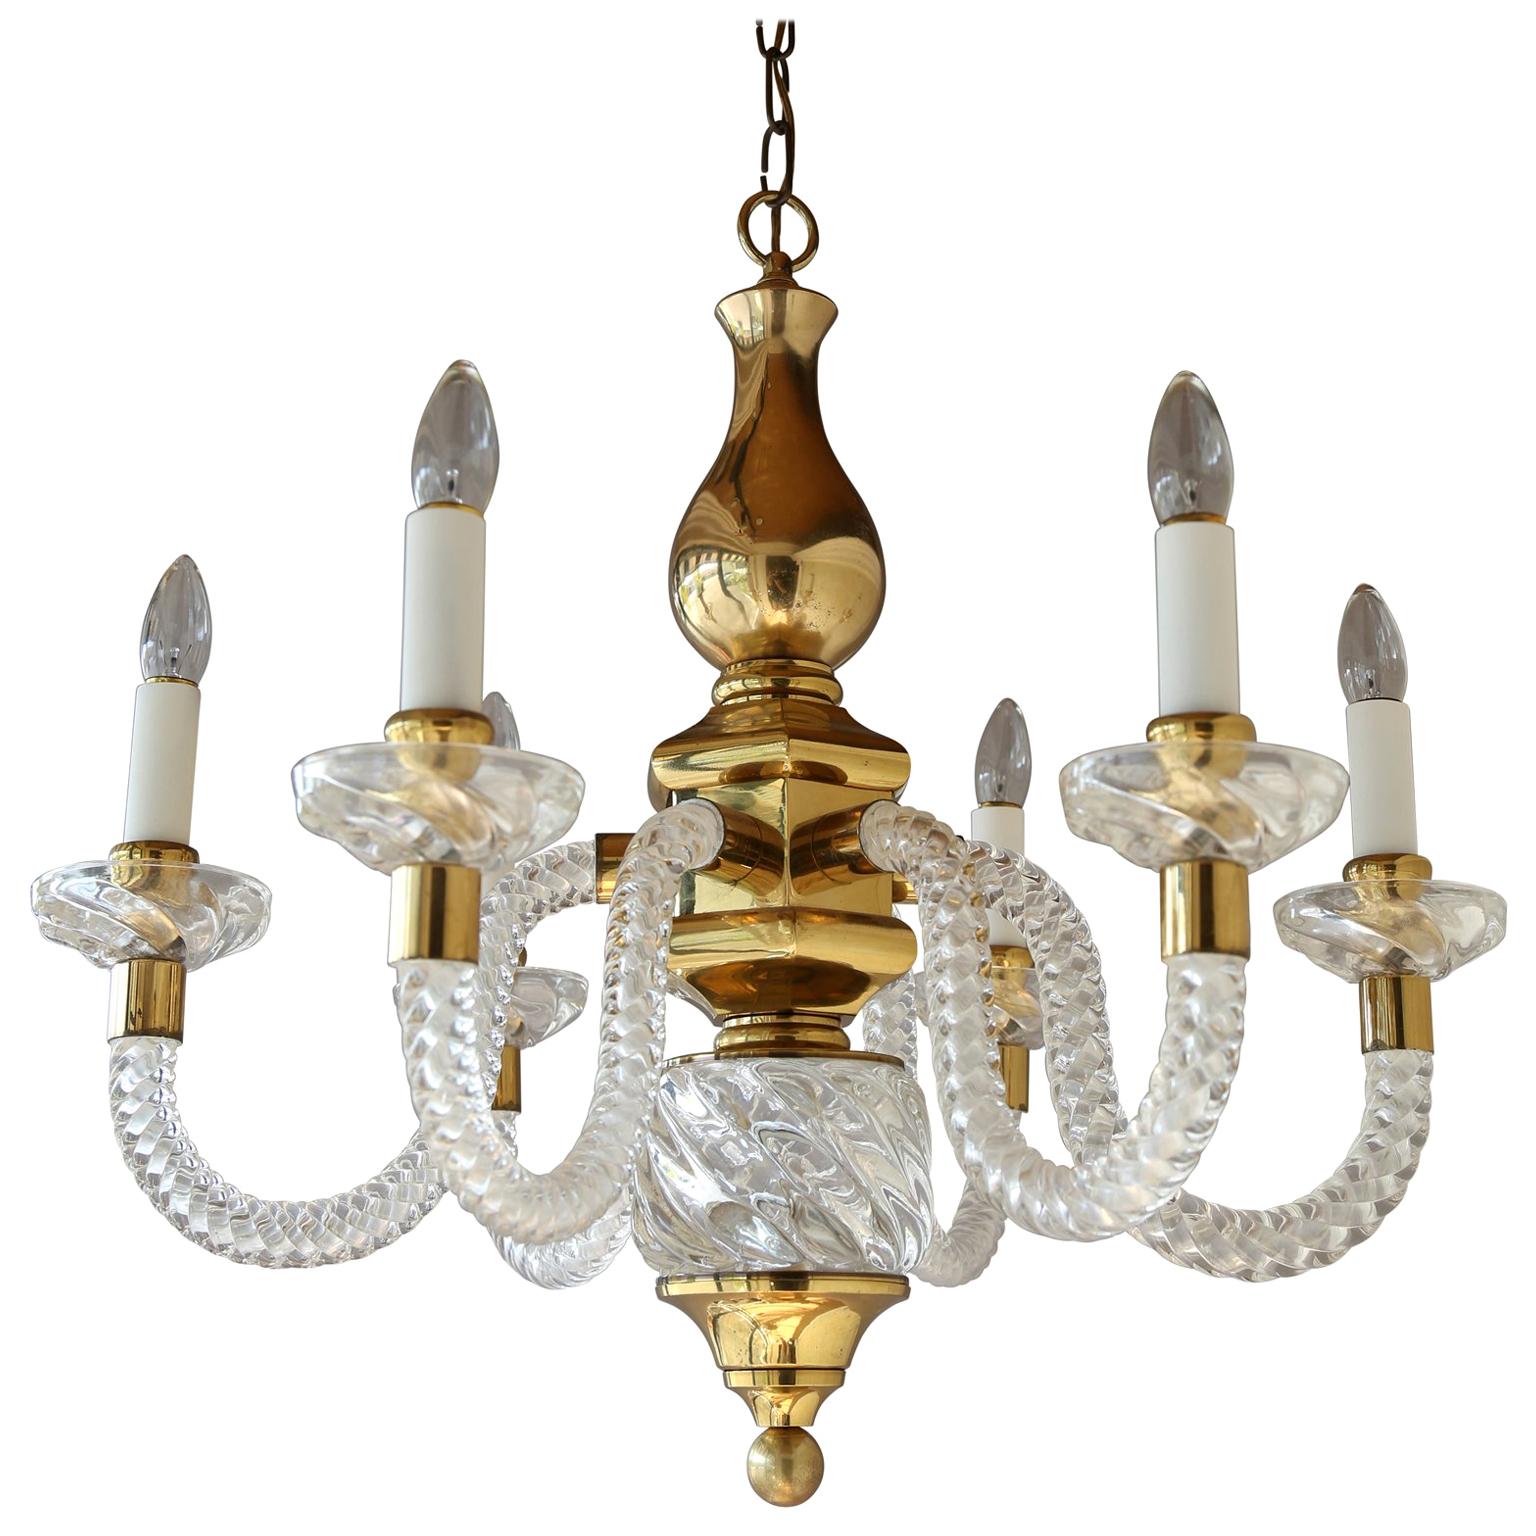 Vintage Chandelier with Spiral Glass Arms and Brass Accents